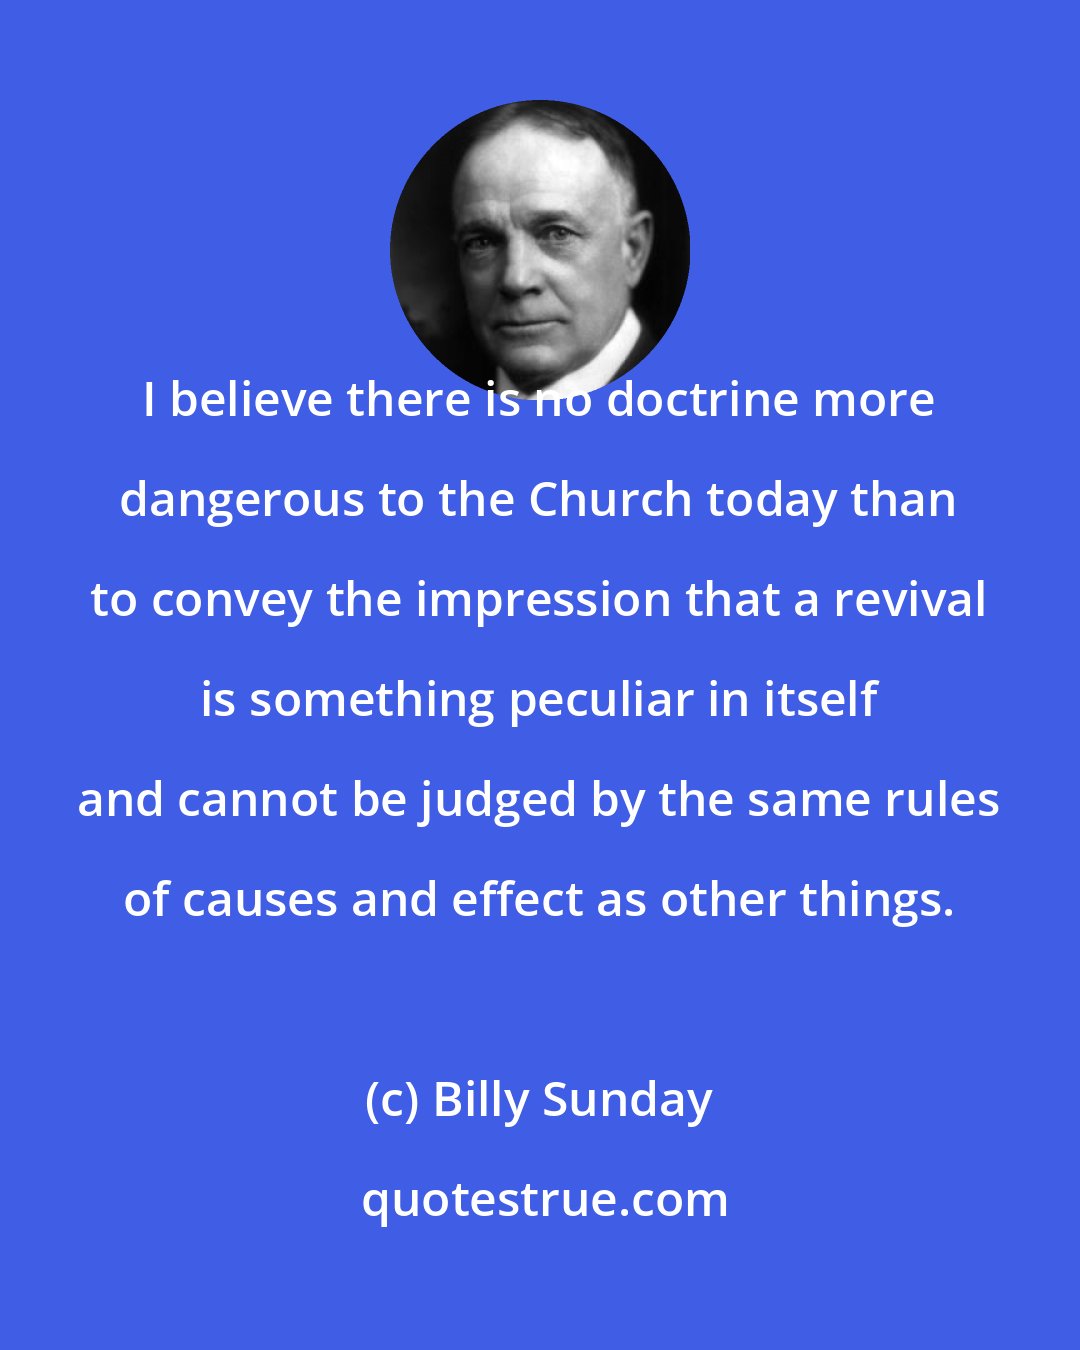 Billy Sunday: I believe there is no doctrine more dangerous to the Church today than to convey the impression that a revival is something peculiar in itself and cannot be judged by the same rules of causes and effect as other things.